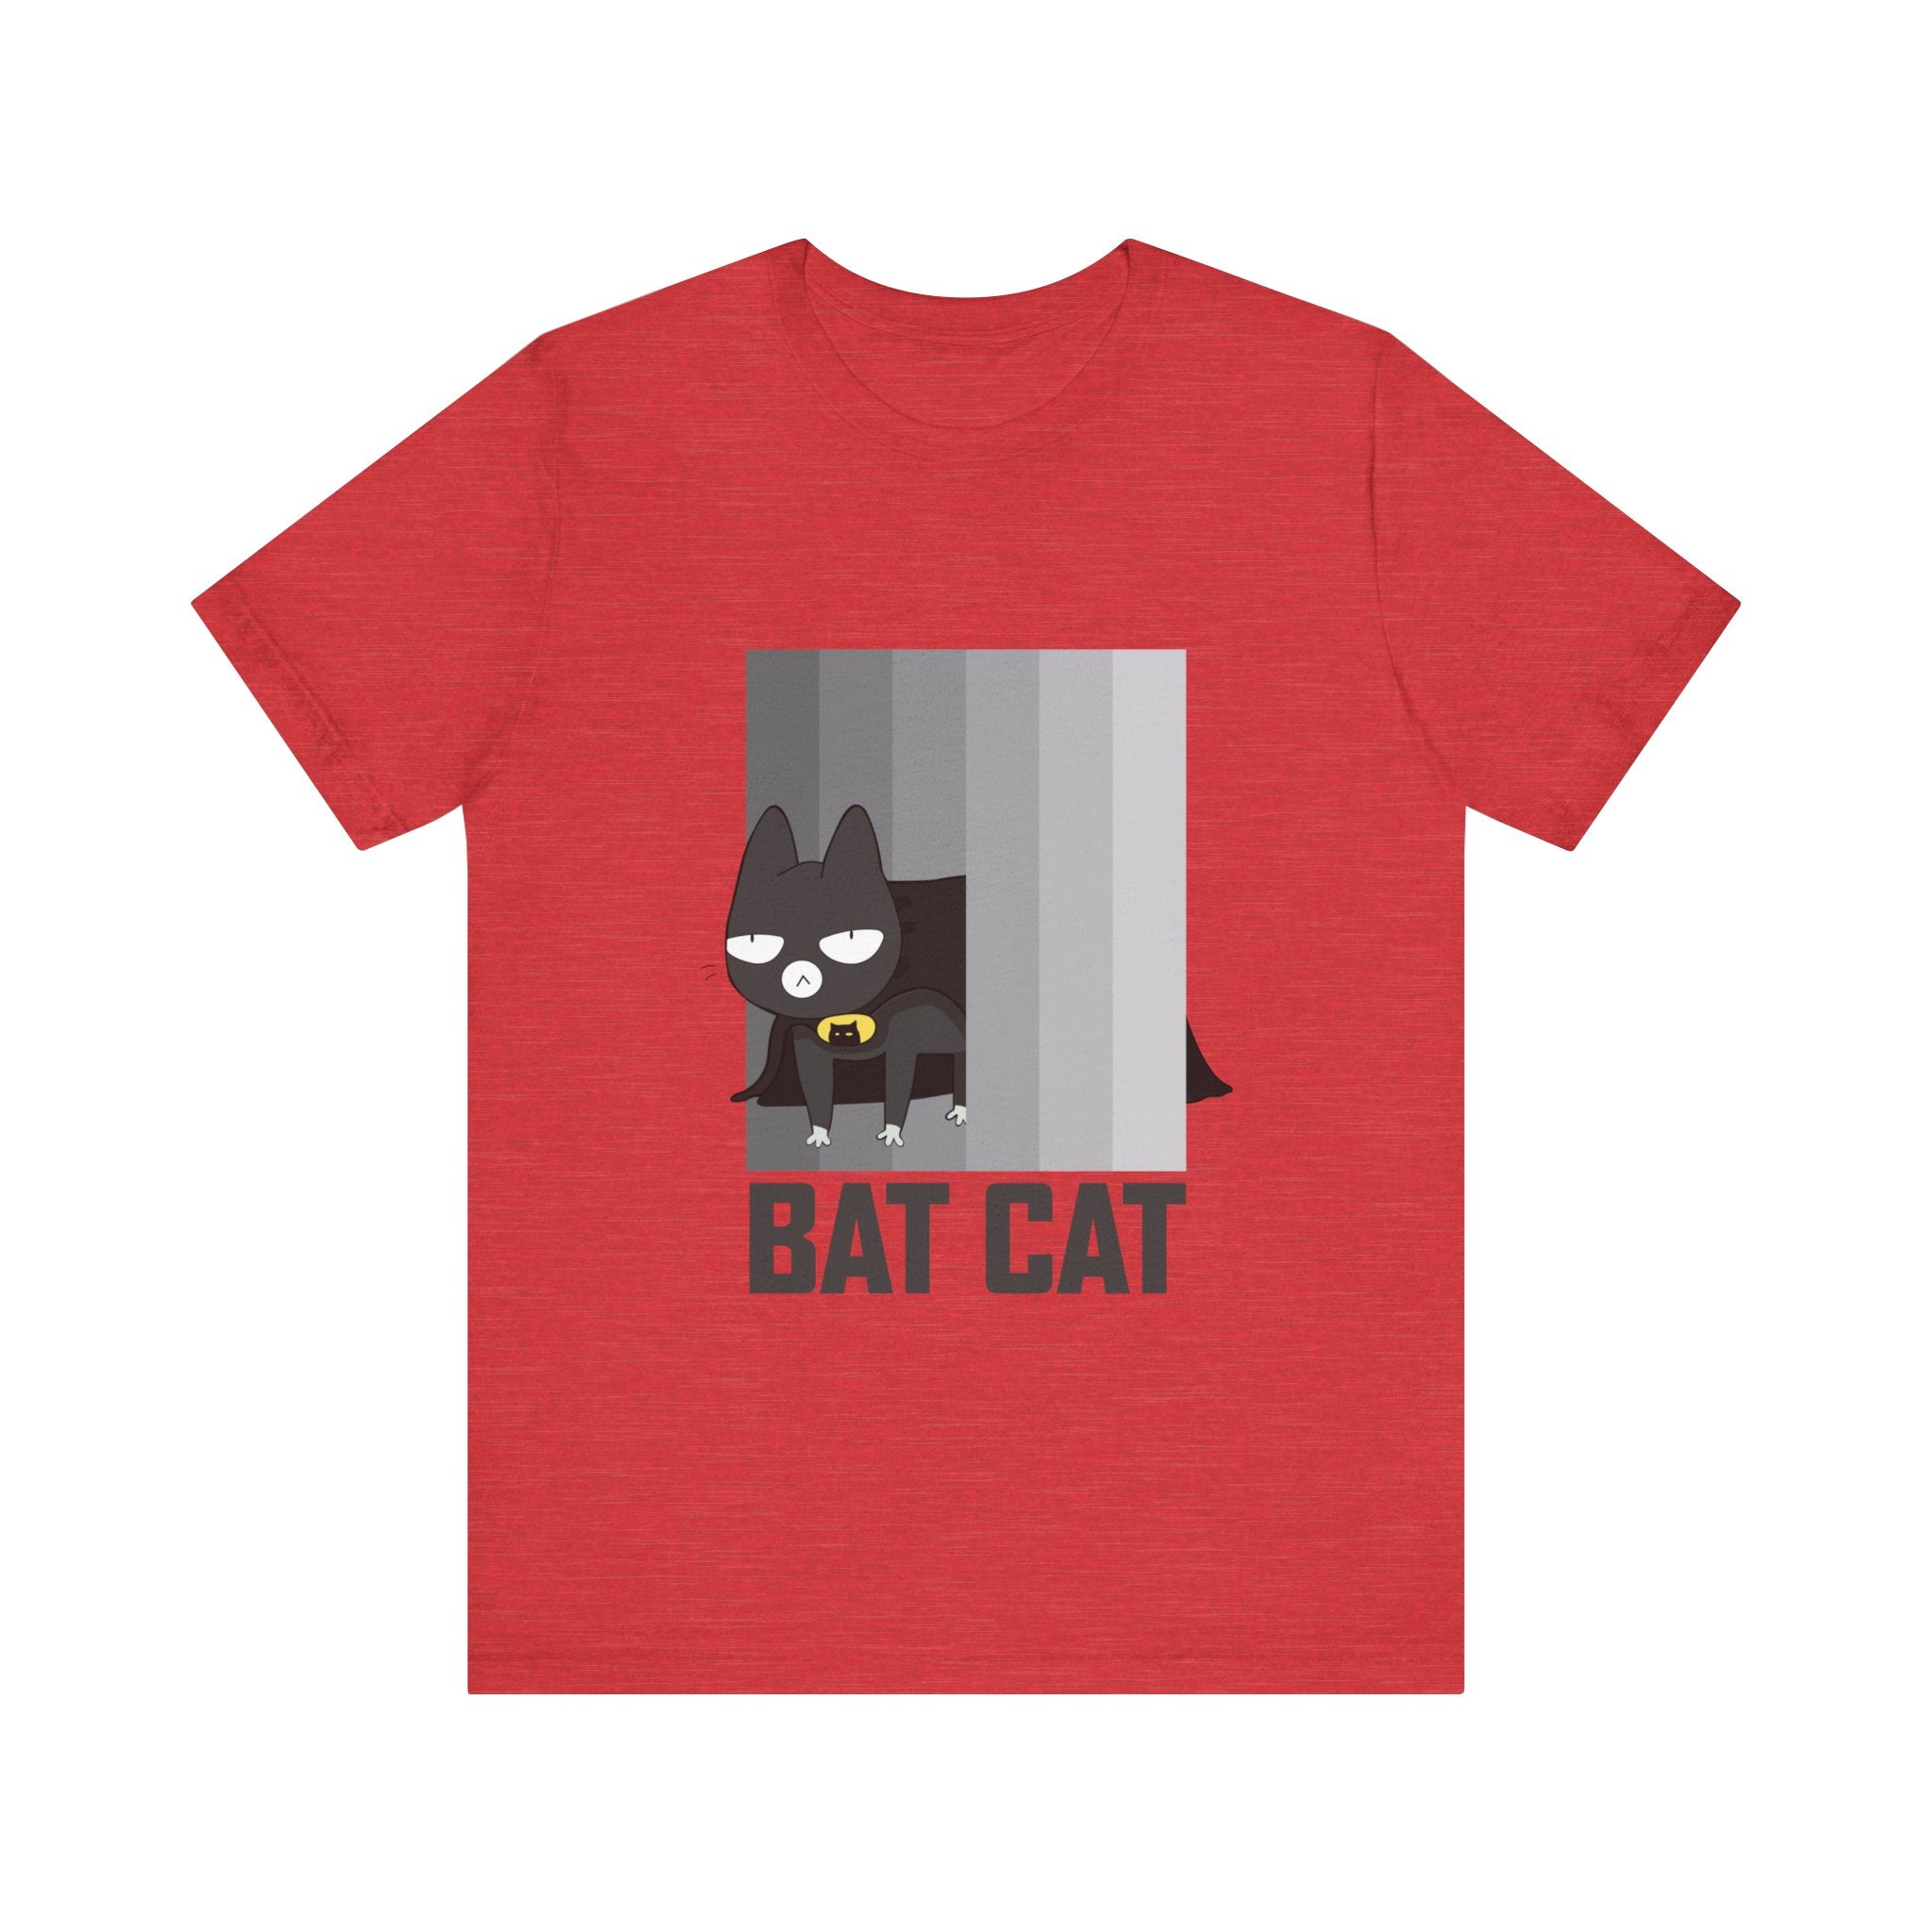 BATCAT T-Shirt with a graphic of a cartoon cat dressed as a bat, standing beside the text “Batcat” on a gray stripe background.